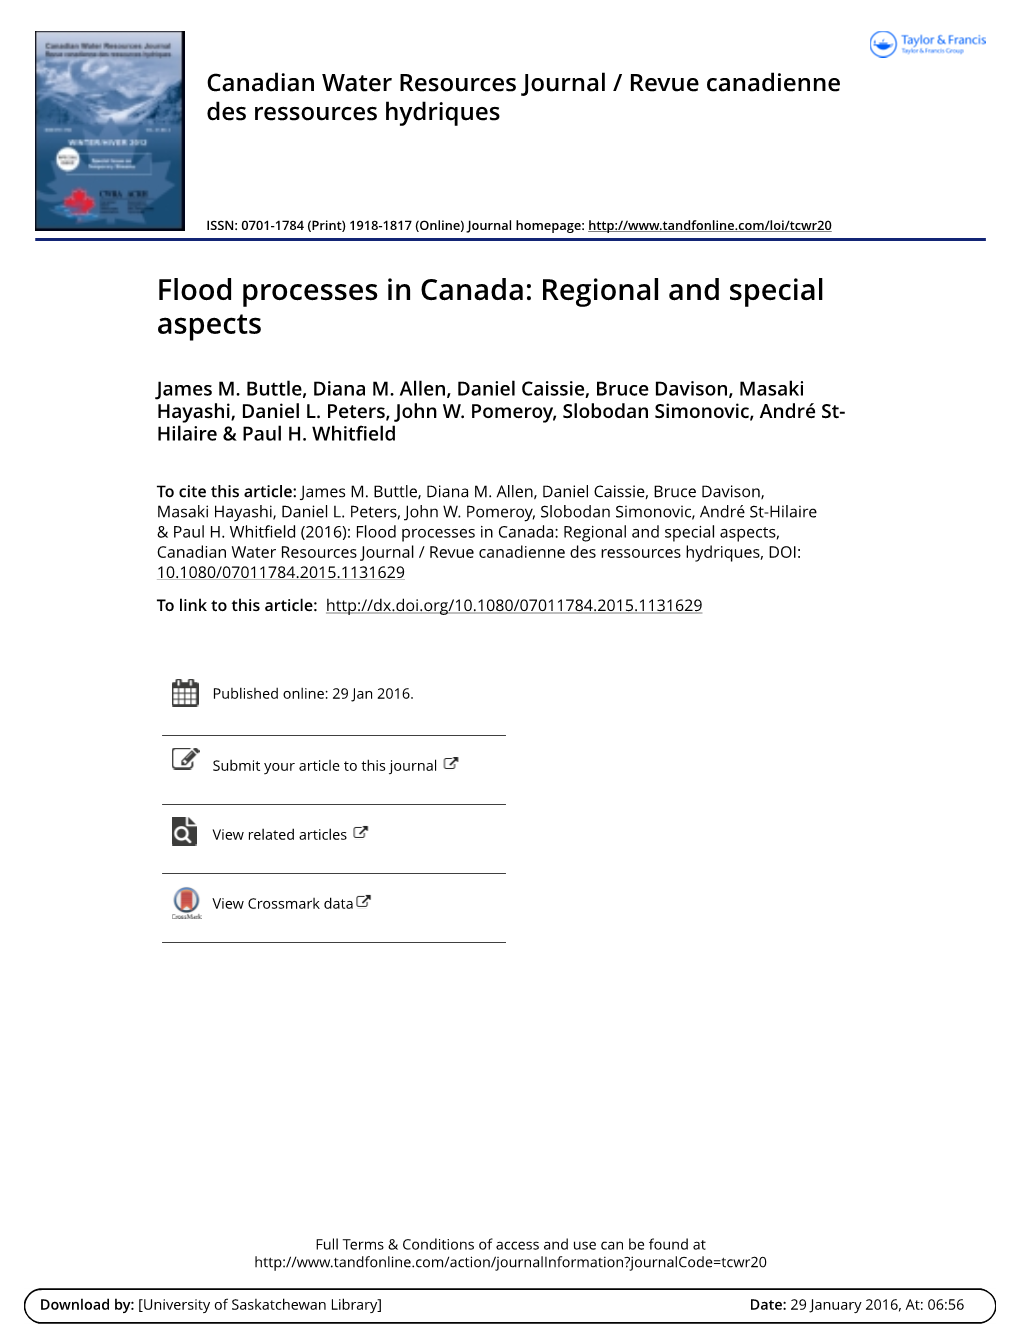 Flood Processes in Canada: Regional and Special Aspects